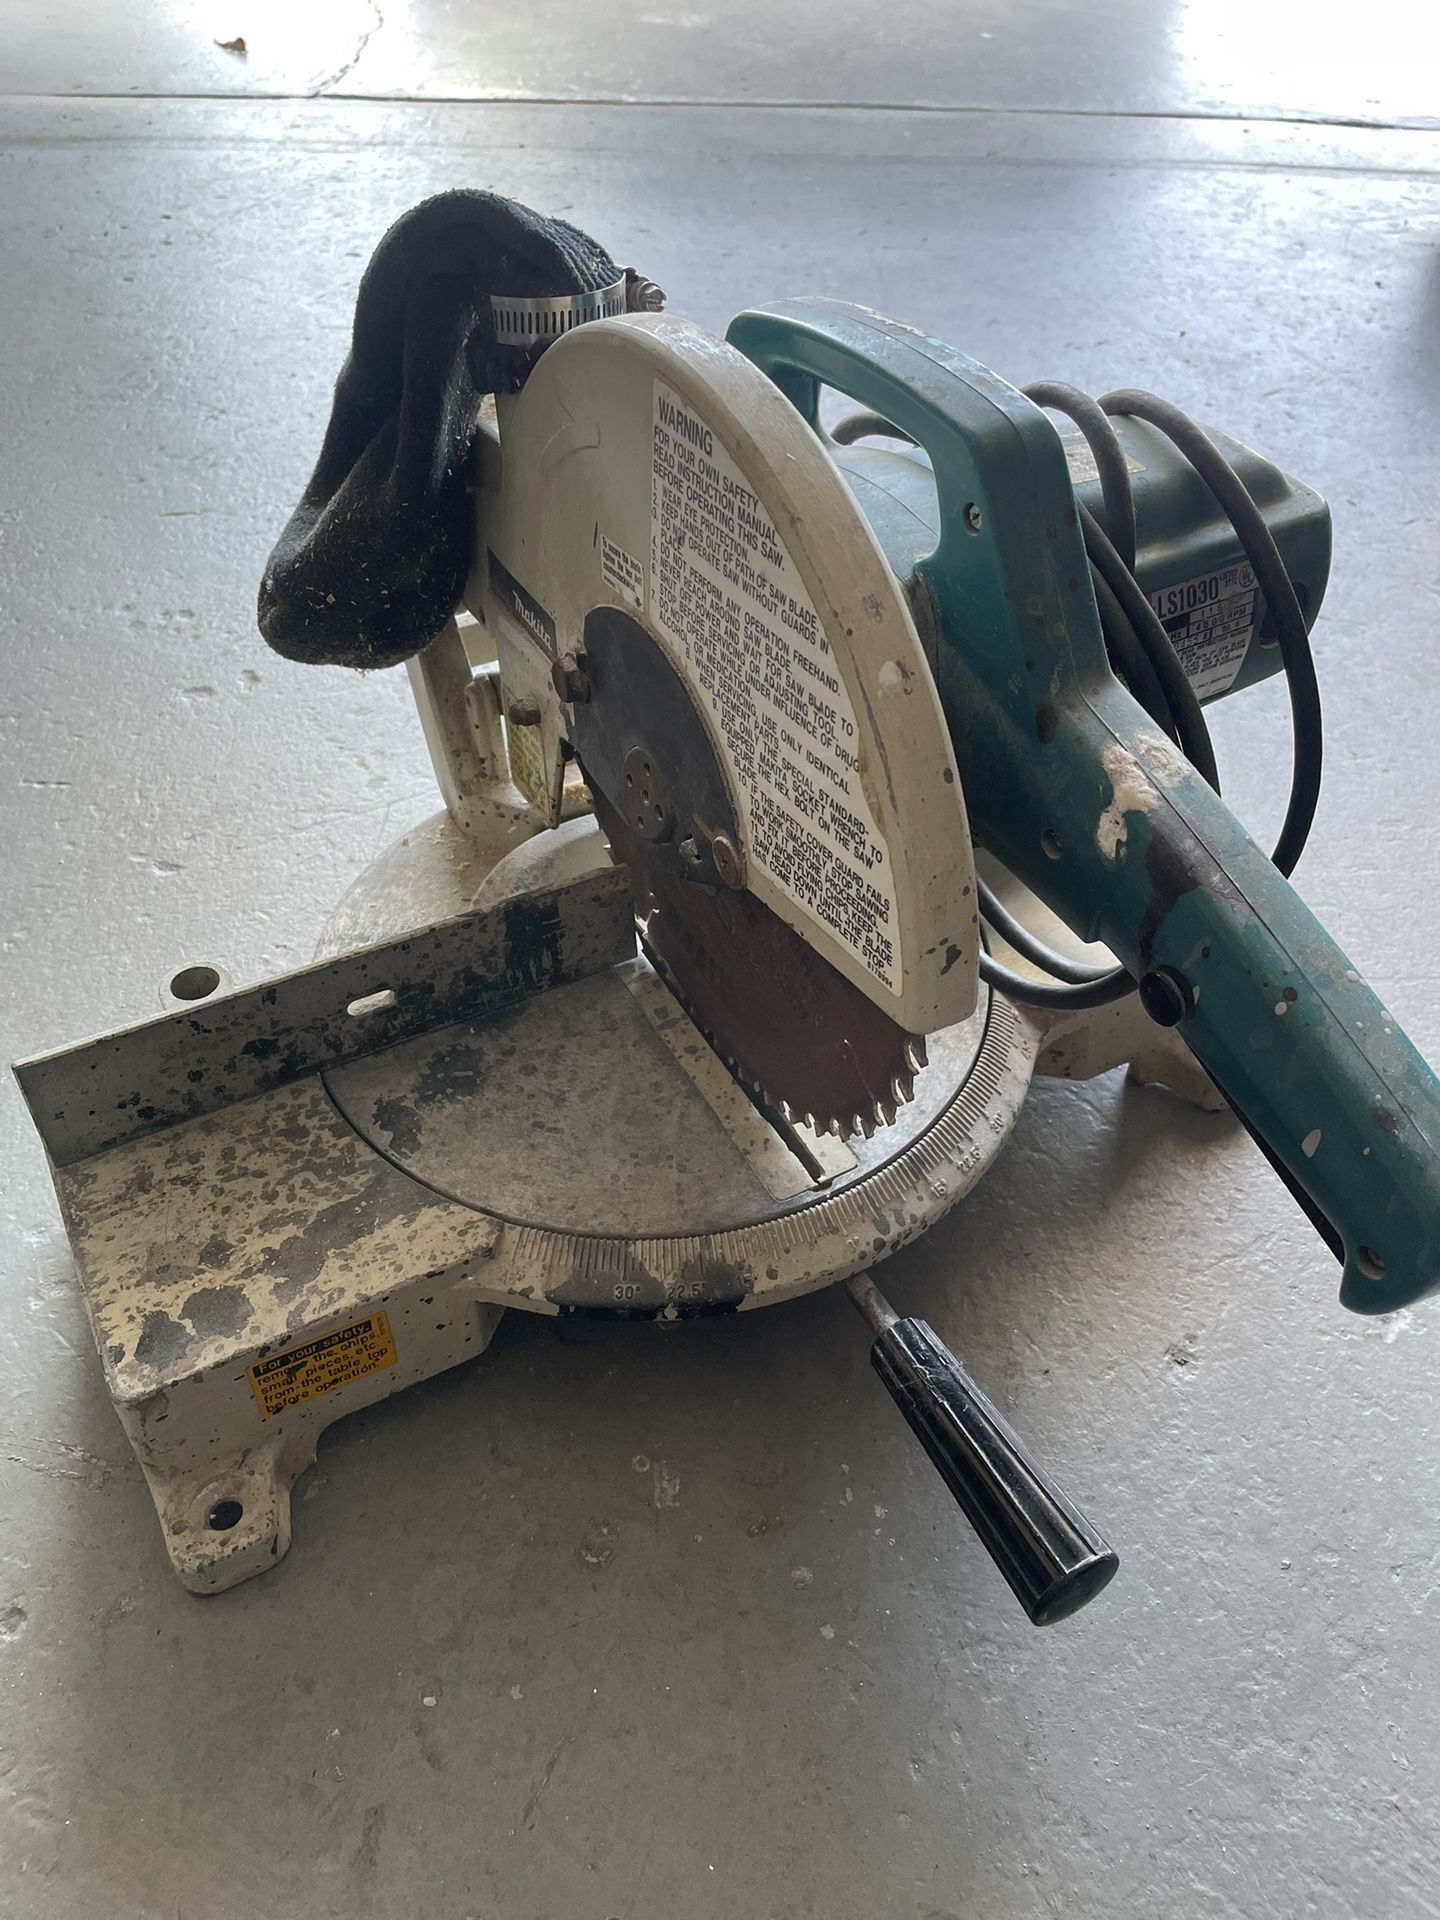 Makita miter saw with Stucco and Joint compound